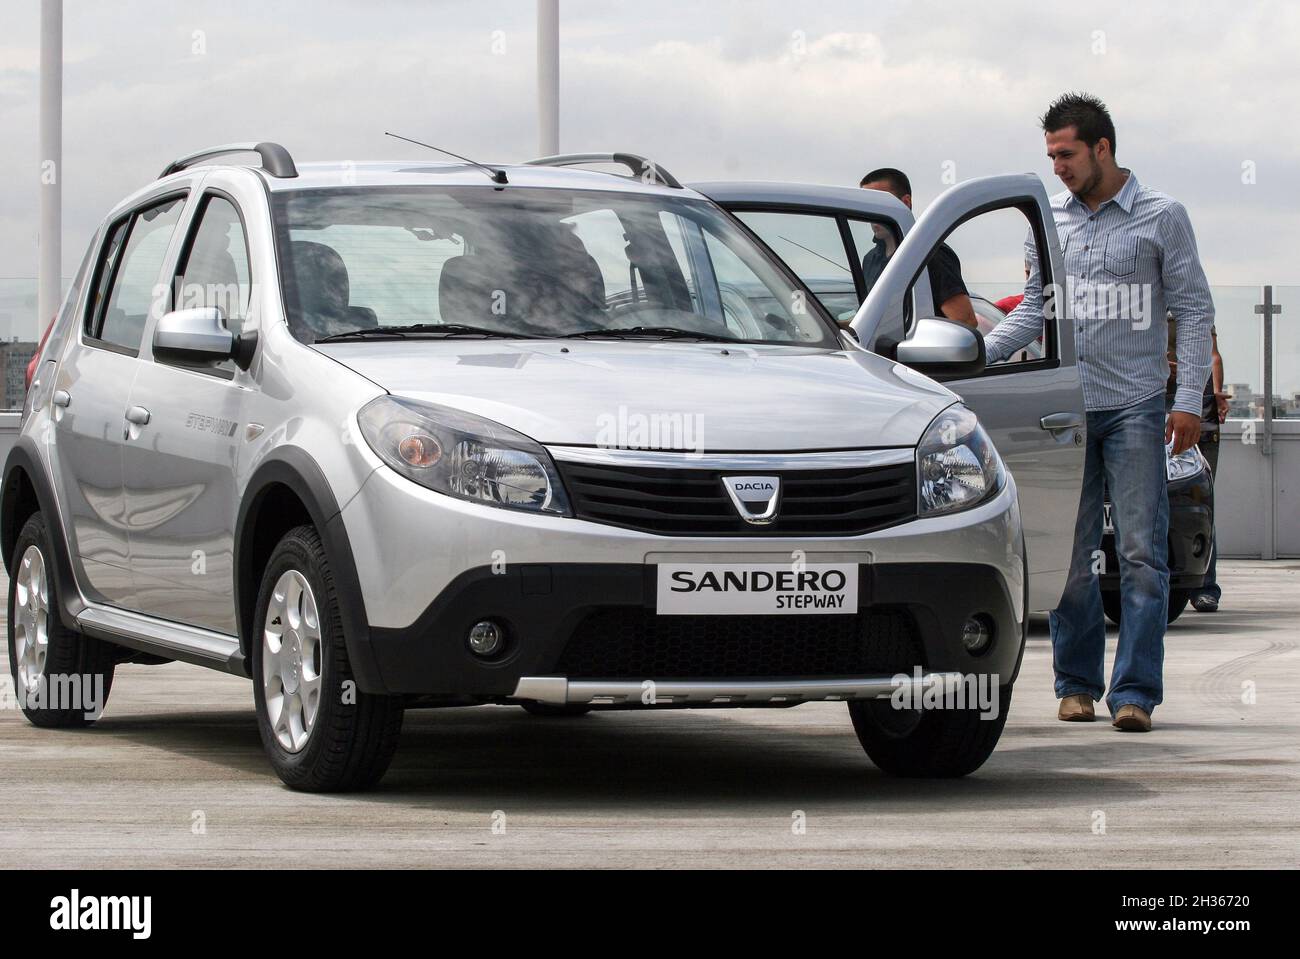 Bucharest, Romania, June 17, 2009: A man is looking at a Dacia Sandero model in a showroom in Bucharest. Stock Photo